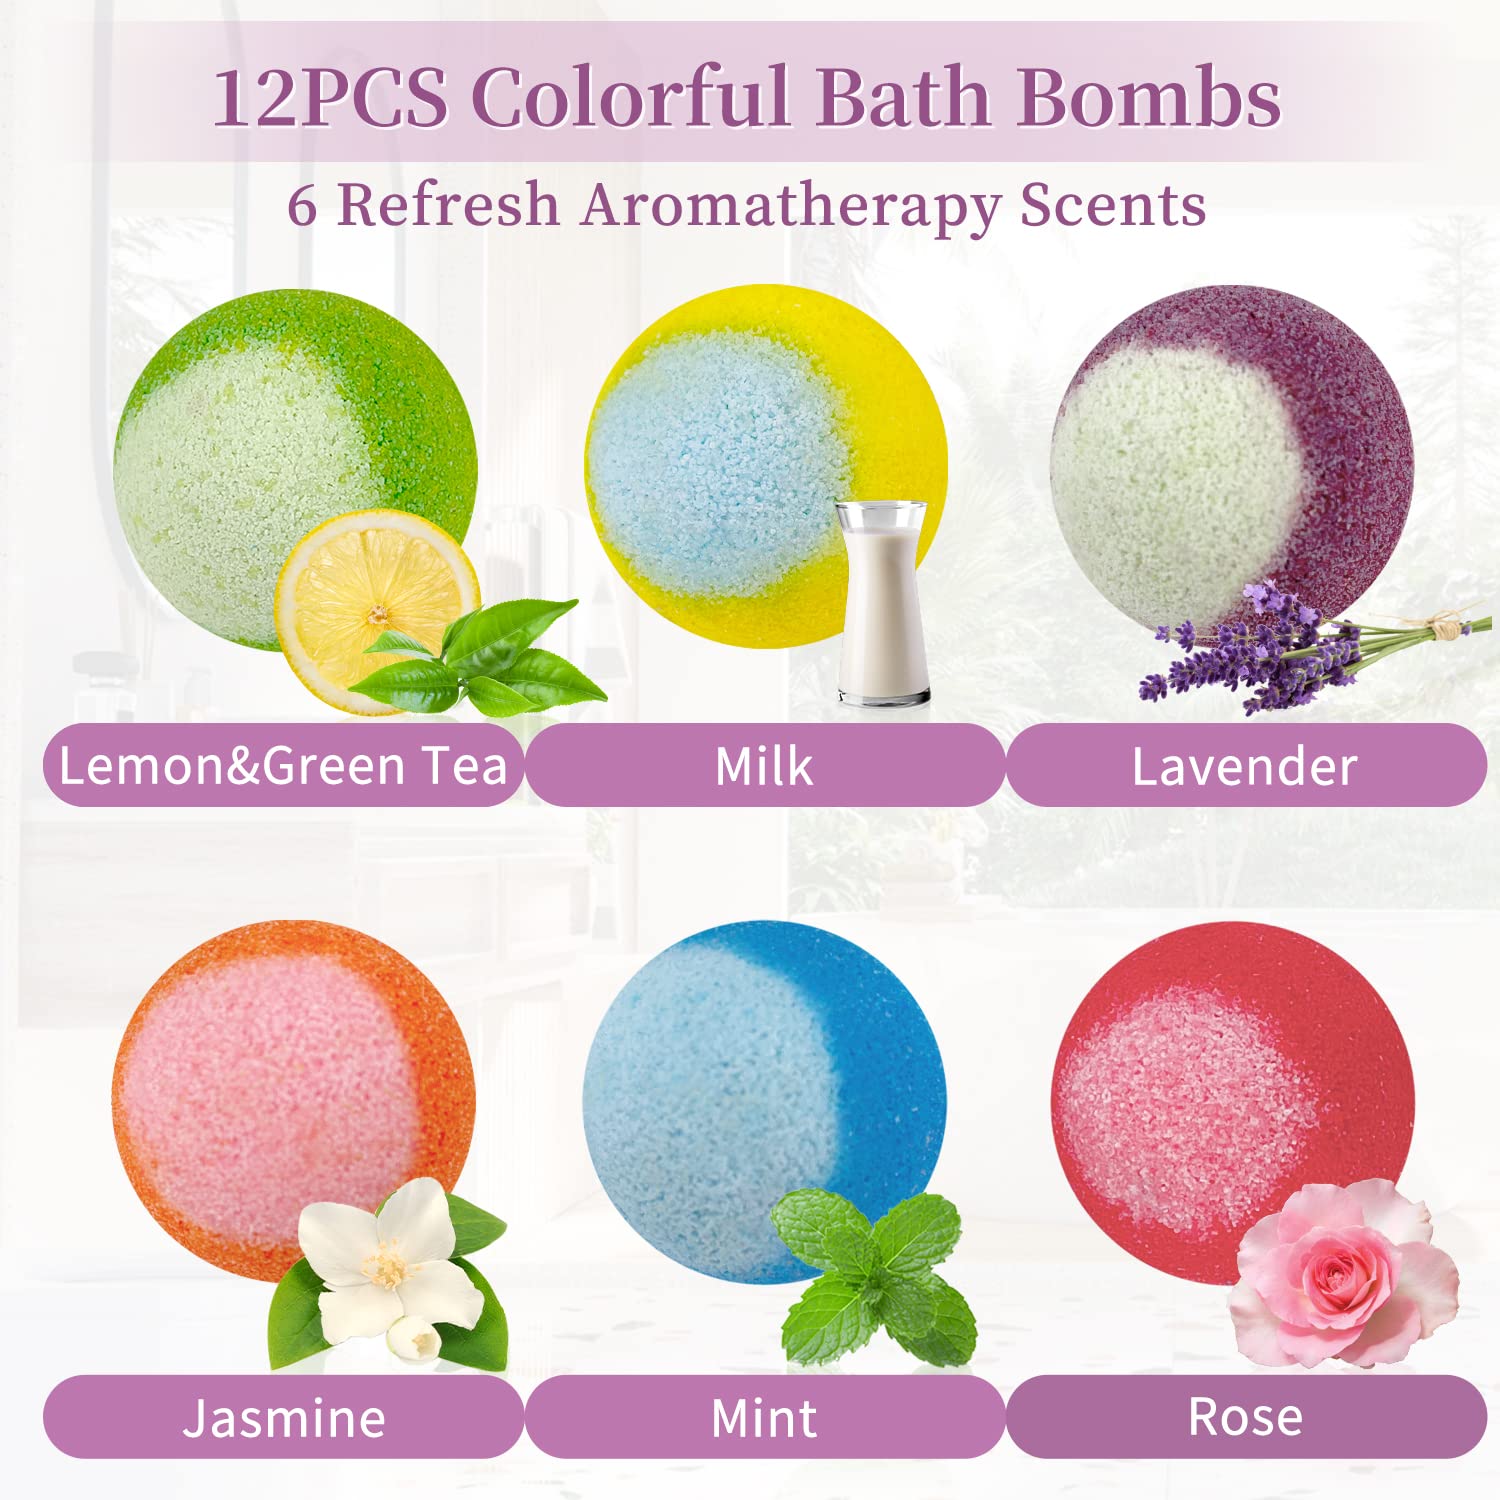 Bath Bombs, 12PCS Bath Bombs for Women Gifts, 100% Essential Oil Natural Organic Fizzy Bath Spa Relaxation Gift for Kids, Ideal Luxury Home Spa Presents for Birthday, Mother's Day, Christmas, Teachers